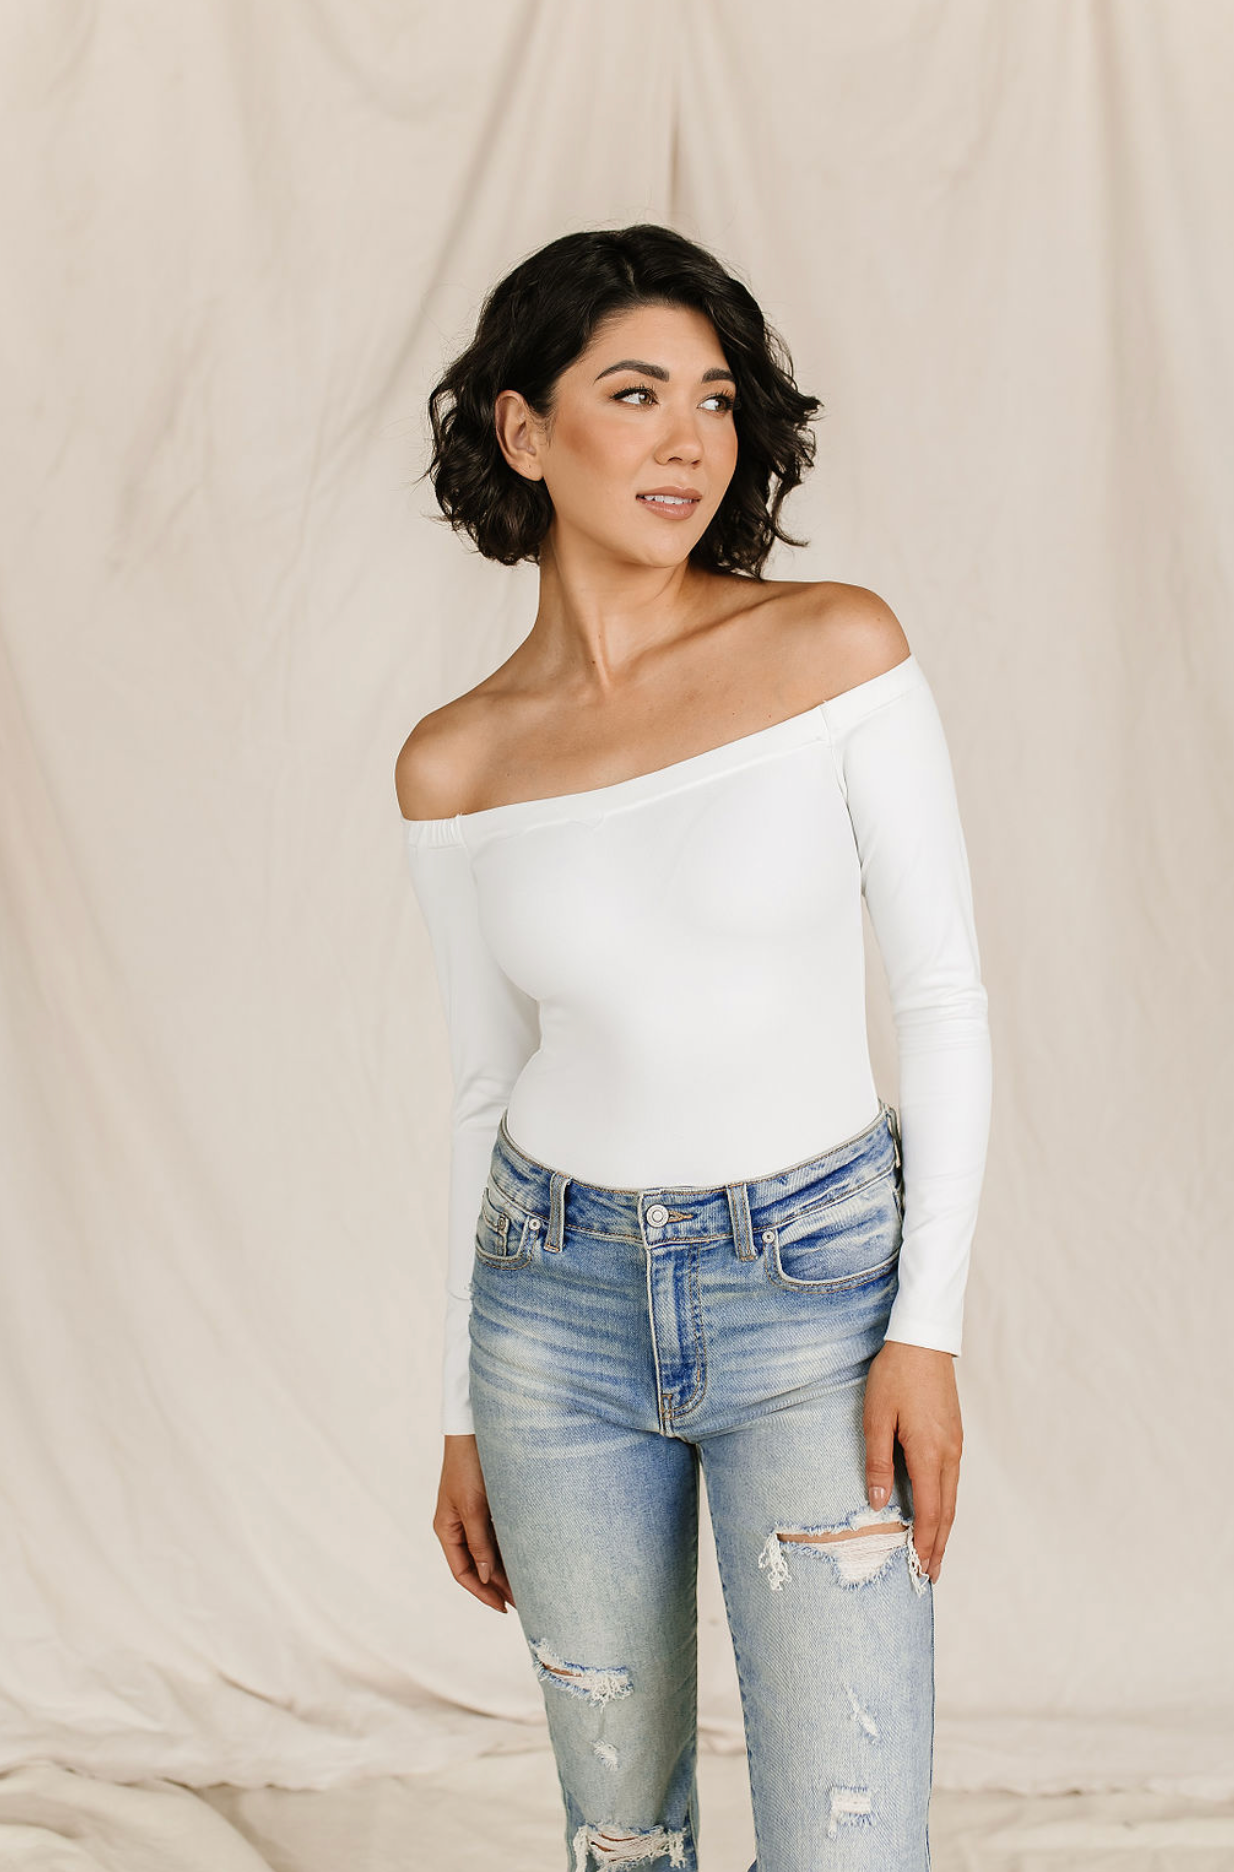 Ampersand Bodysuit Off the Shoulder Long Sleeve Crew Top, White-Shirts & Tops-Sunshine and Wine Boutique